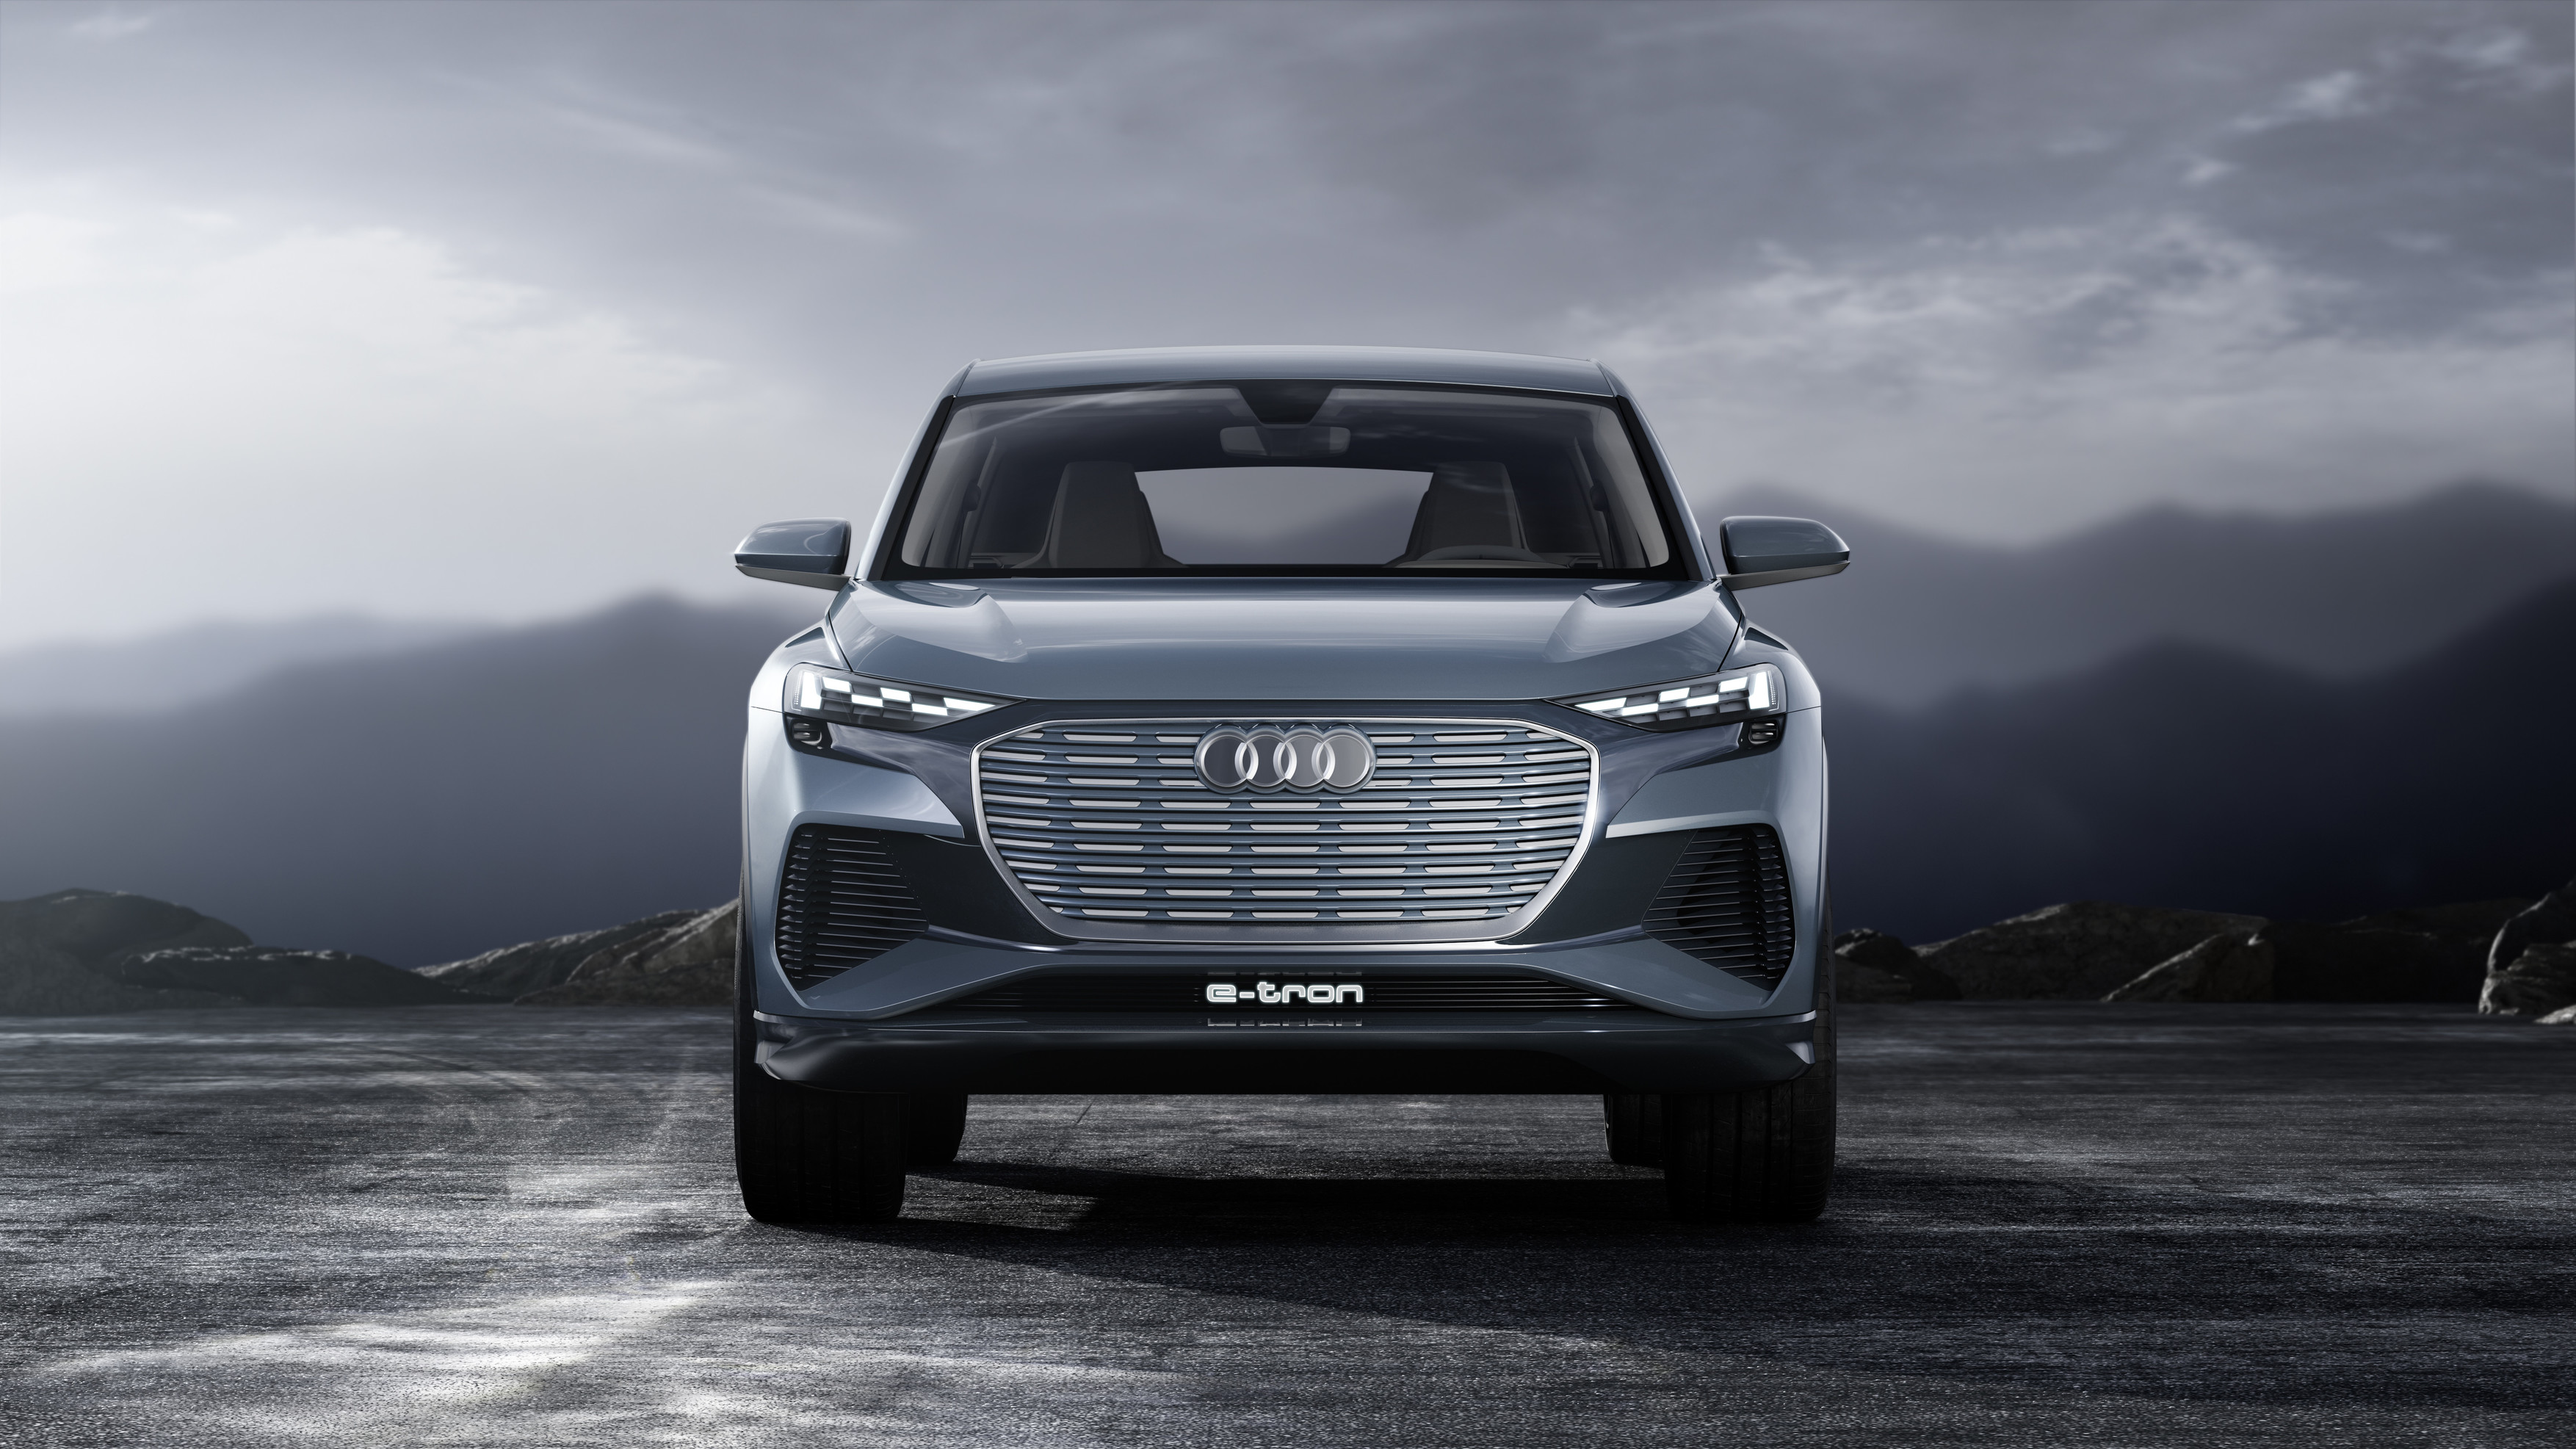 Audi S New Q4 E Tron Concept Is A Compact Electric Crossover With 280 Miles Of Range Internet Technology News - roblox greenville driving my rolls royce phantom